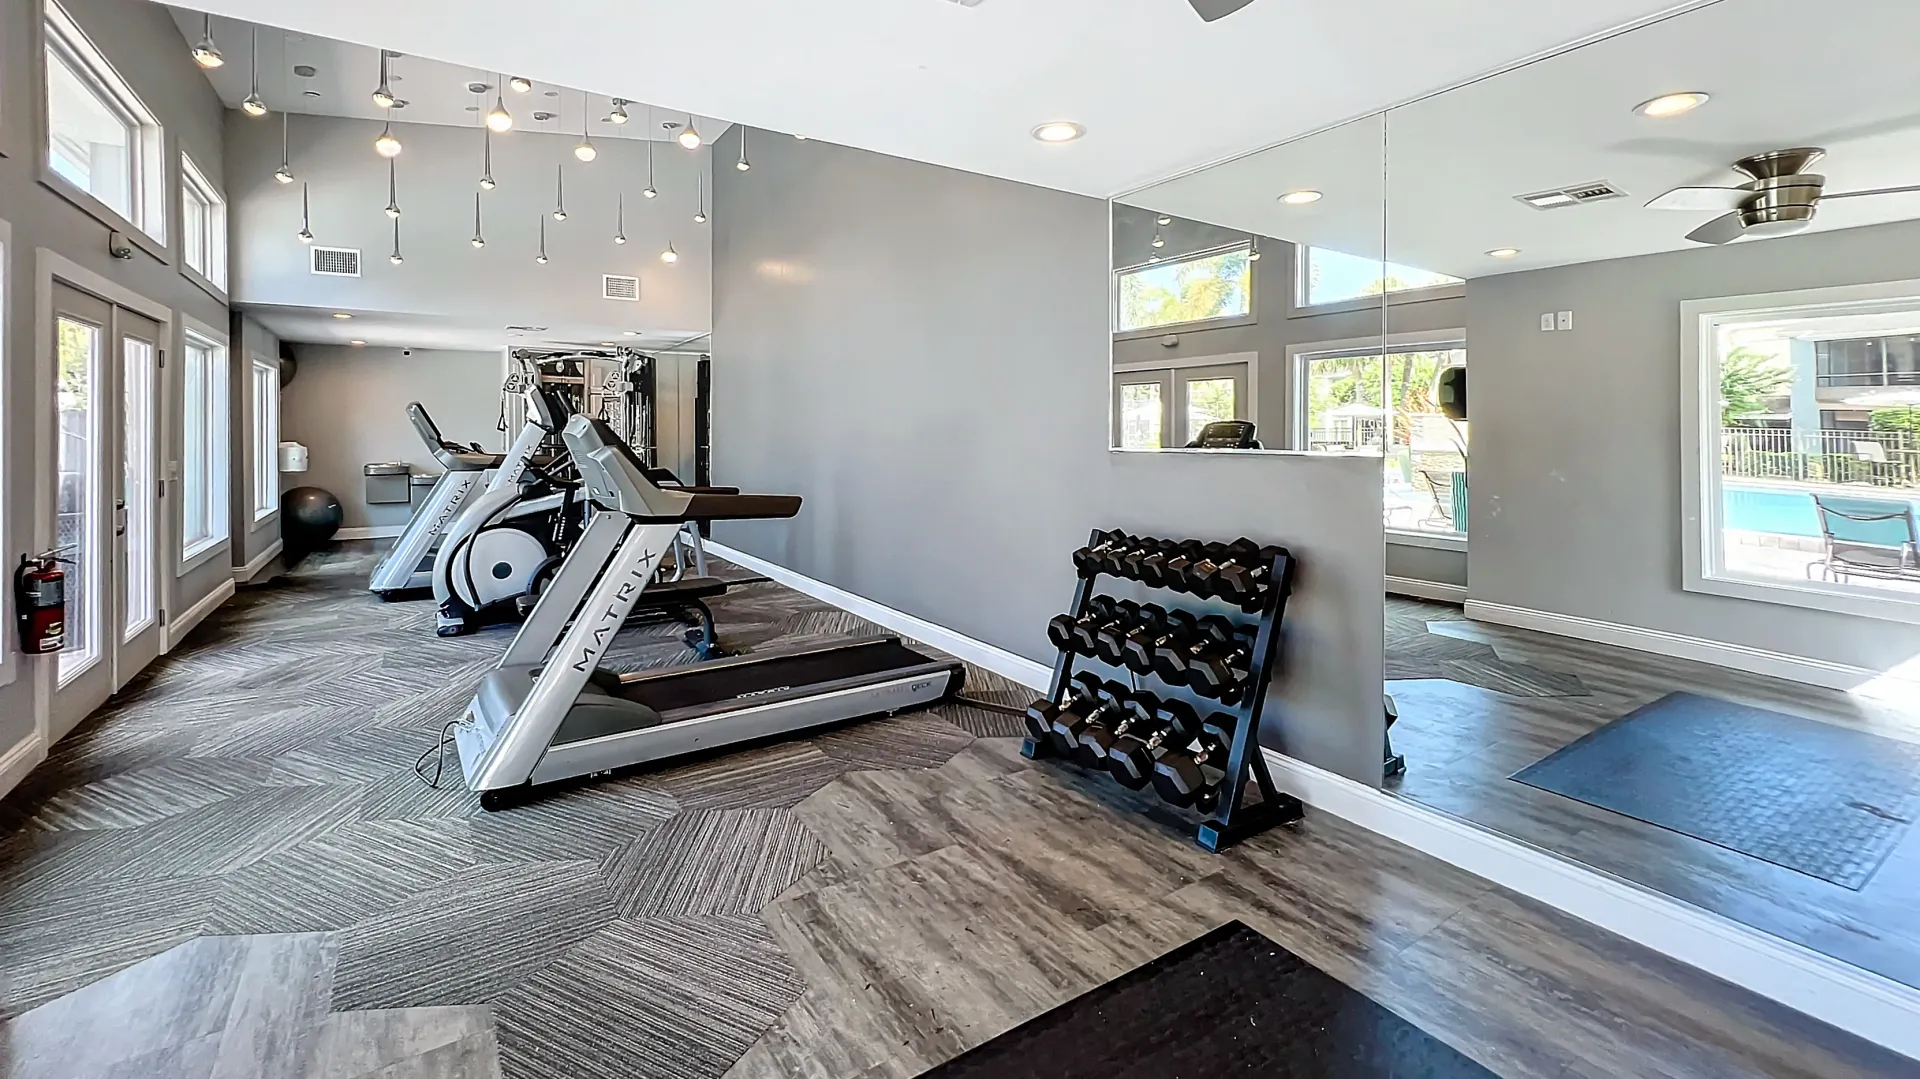 Fitness center with treadmills, free weights, and a view of the pool.